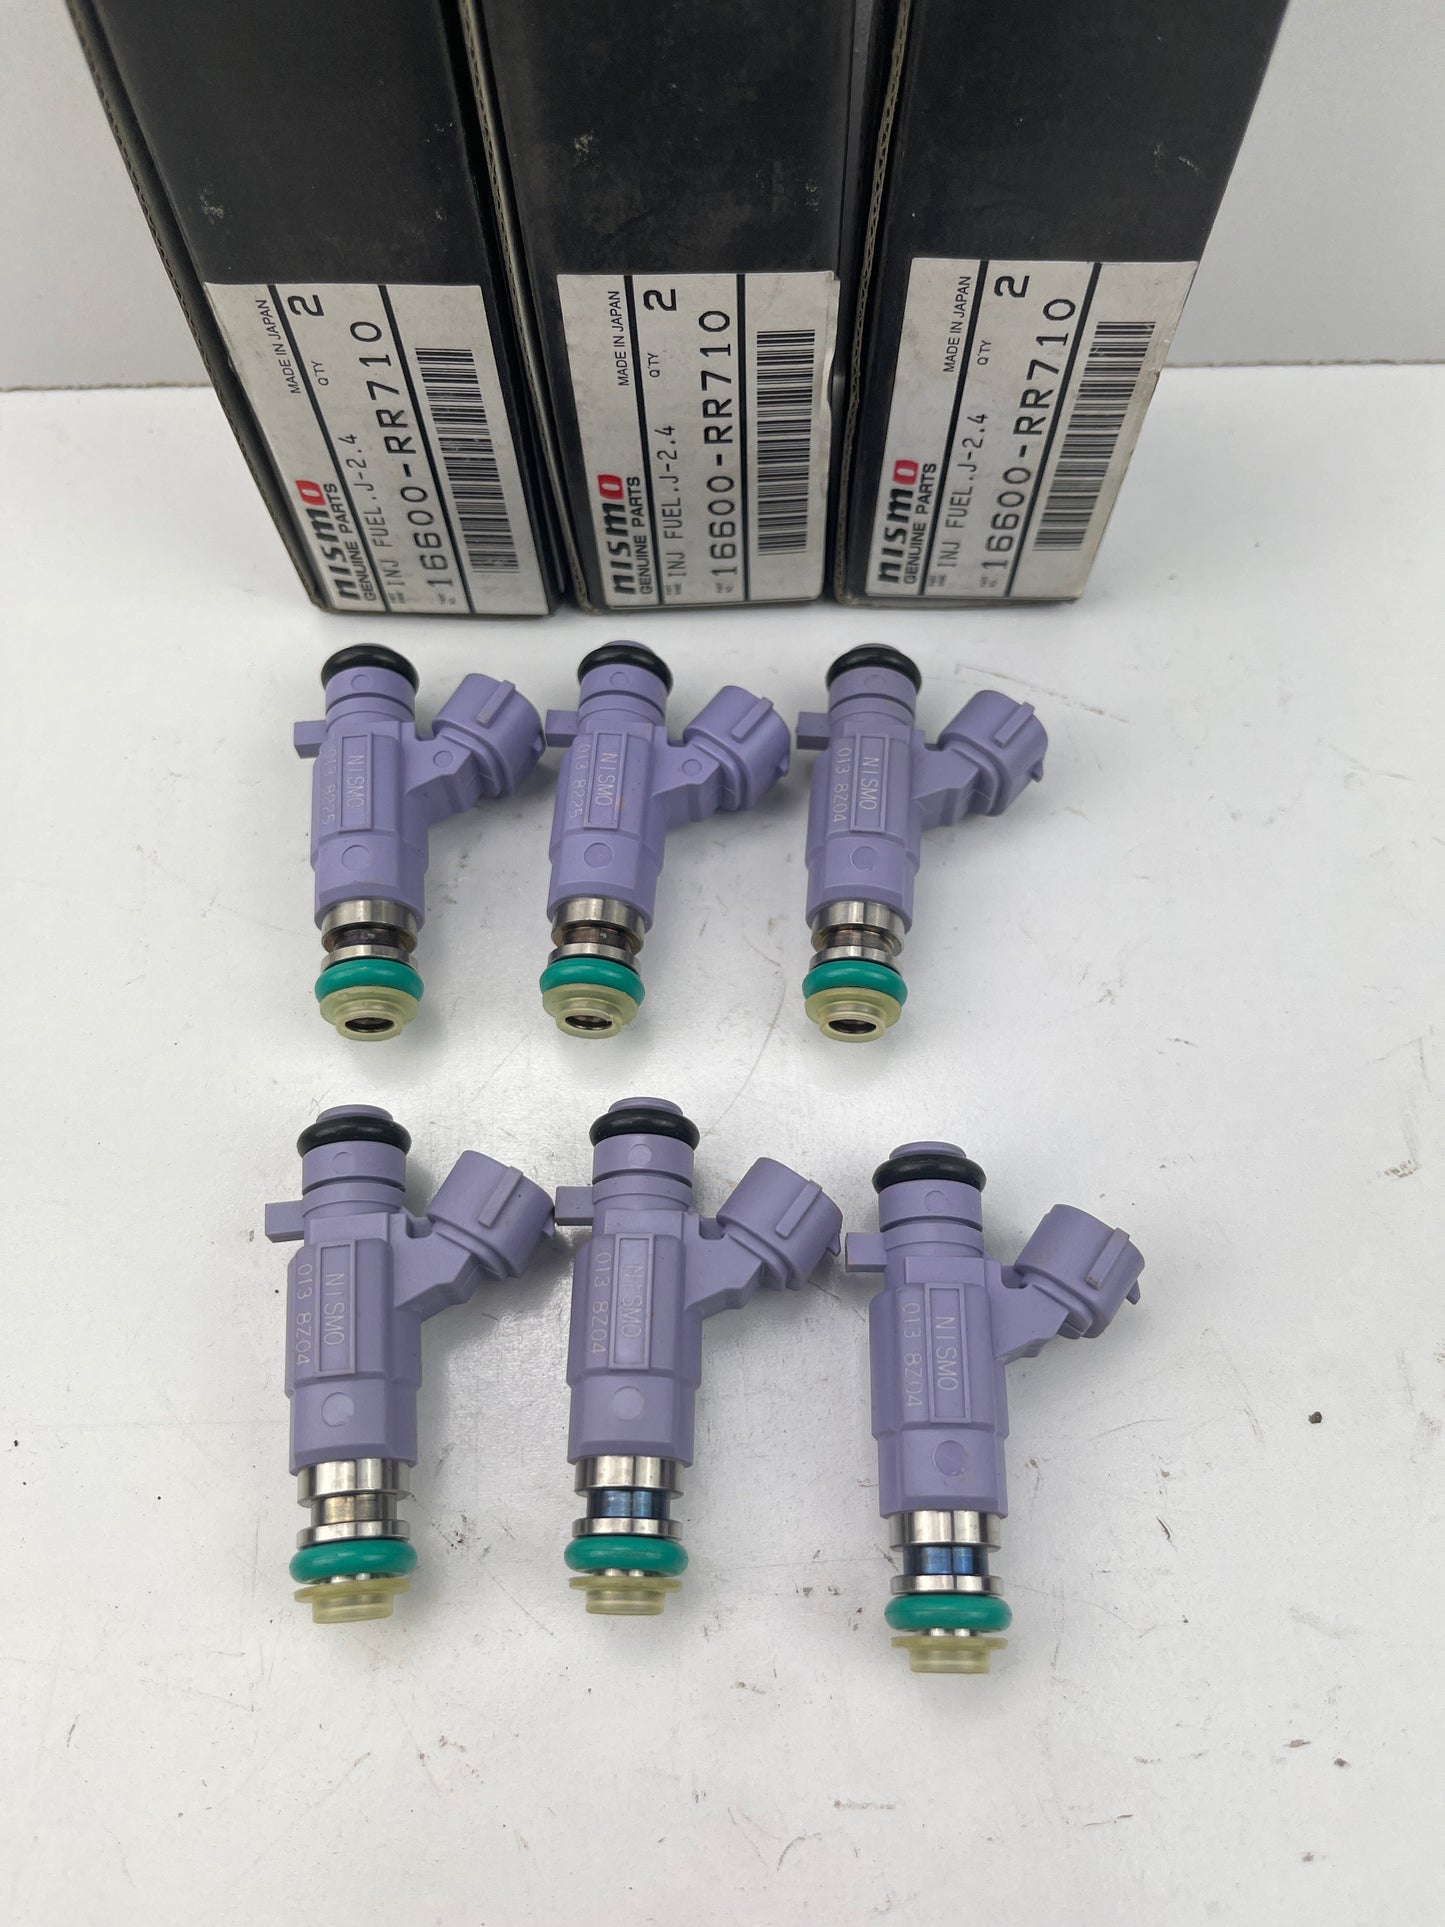 Nismo Fuel Injector Set of 6 (Sold as 3x 16600-RR710 2pk) J-2.4 480cc New RB25NEO